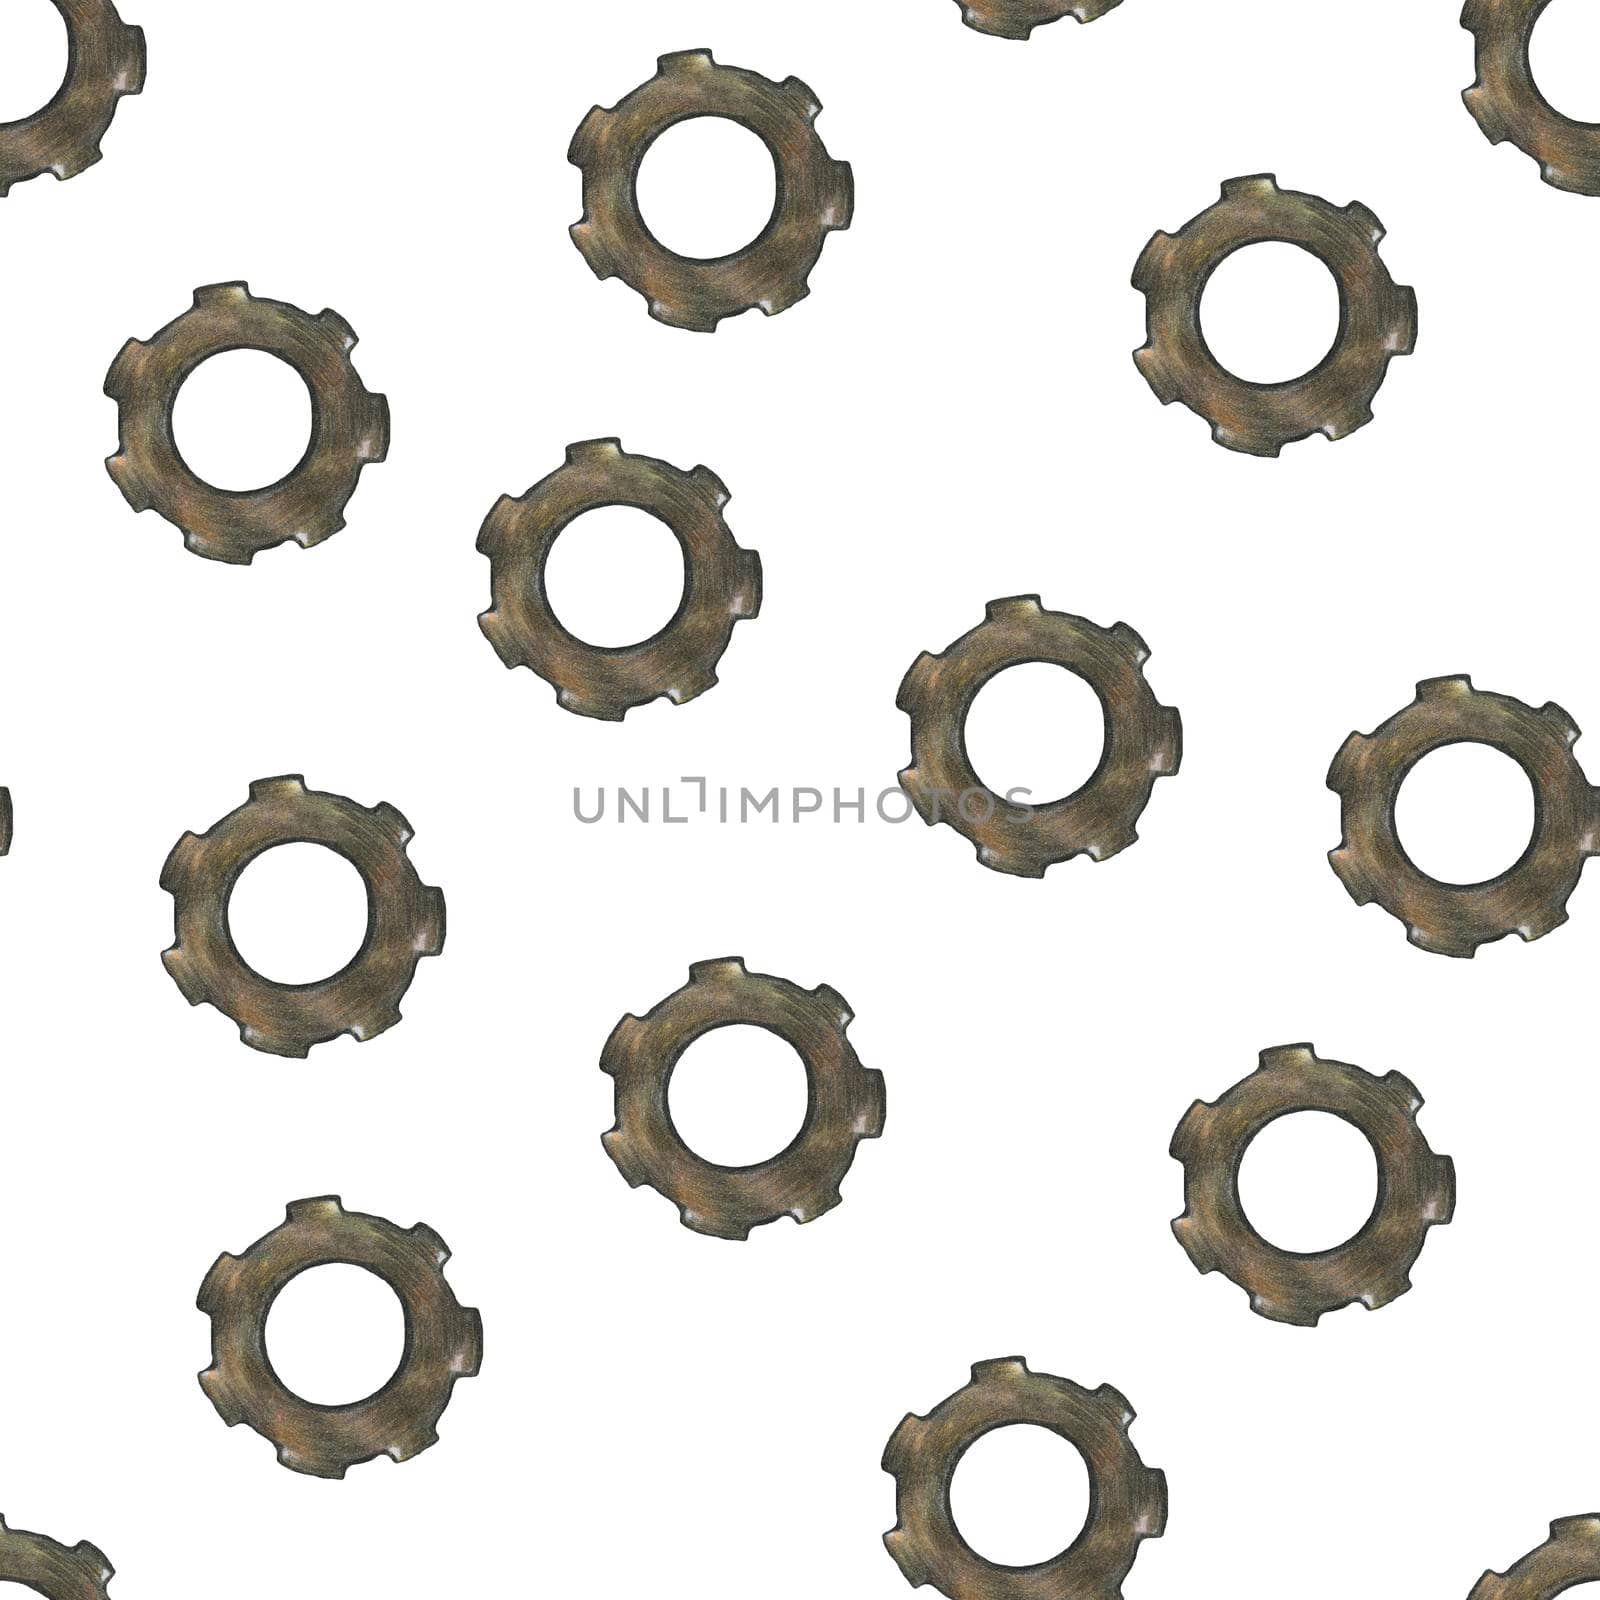 Hand-Drawn Steampunk Gear Transmission Element Seamless Pattern on White Background. Digital Paper with Metal Gear Illustration Drawn by Colored Pencil.